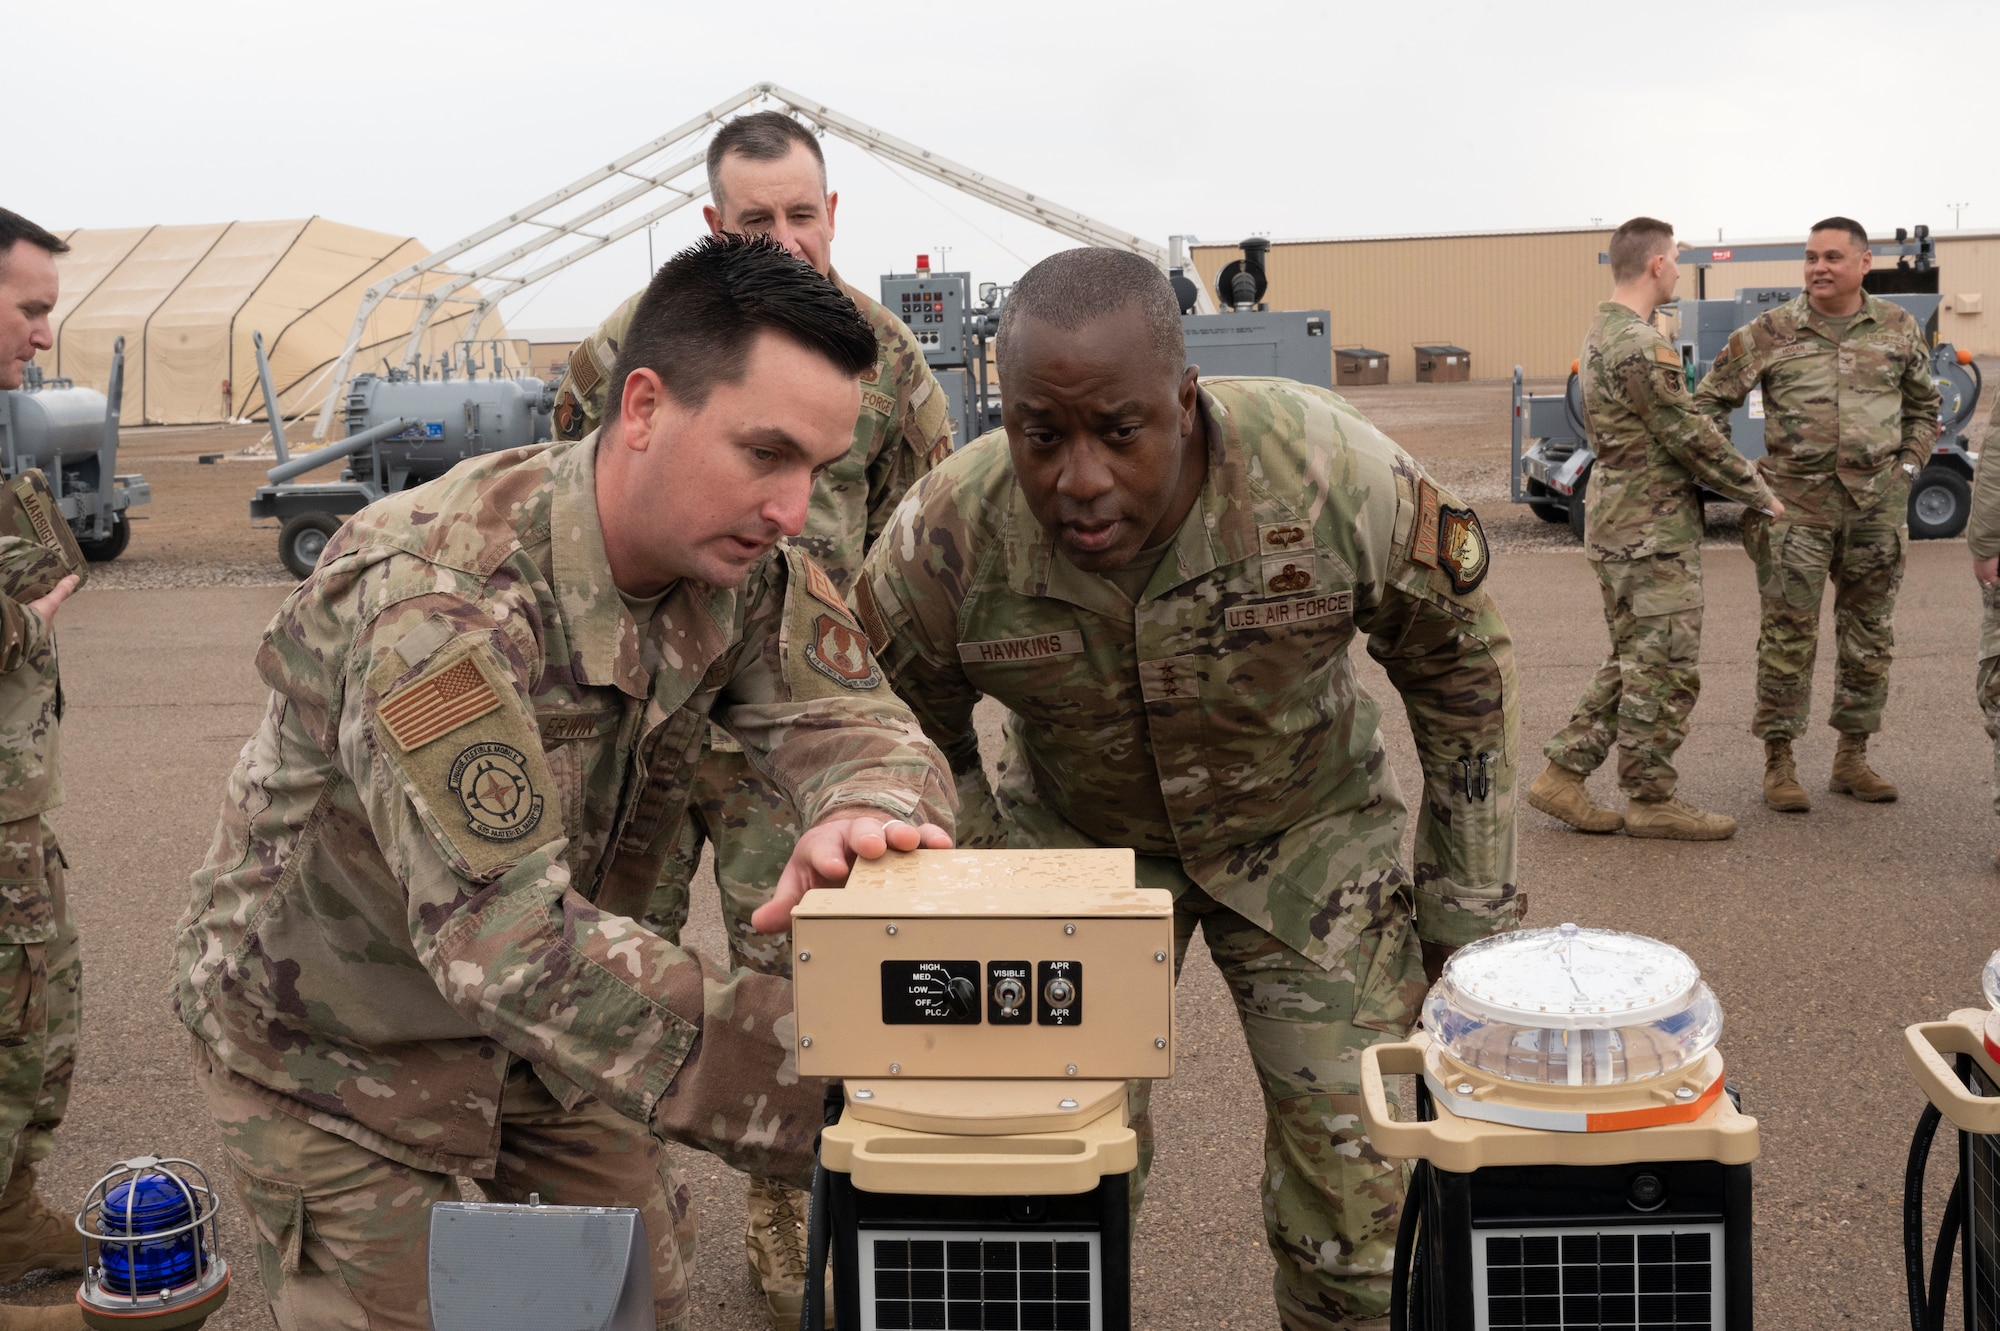 U.S. Air Force Tech. Sgt. Tyler Erwin, 635th Materiel Maintenance Squadron electrical systems supervisor, showcases an emergency airfield lighting system to U.S. Air Force Lt. Gen. Stacey Hawkins, Air Force Sustainment Center commander, during an immersion tour with the 635th MMG at Holloman Air Force Base, New Mexico, Dec. 7, 2022.While touring the base, Hawkins was given a firsthand account of the current assets and deployment capabilities that BEAR has to offer. (U.S. Air Force photo by Airman 1st Class Isaiah Pedrazzini)